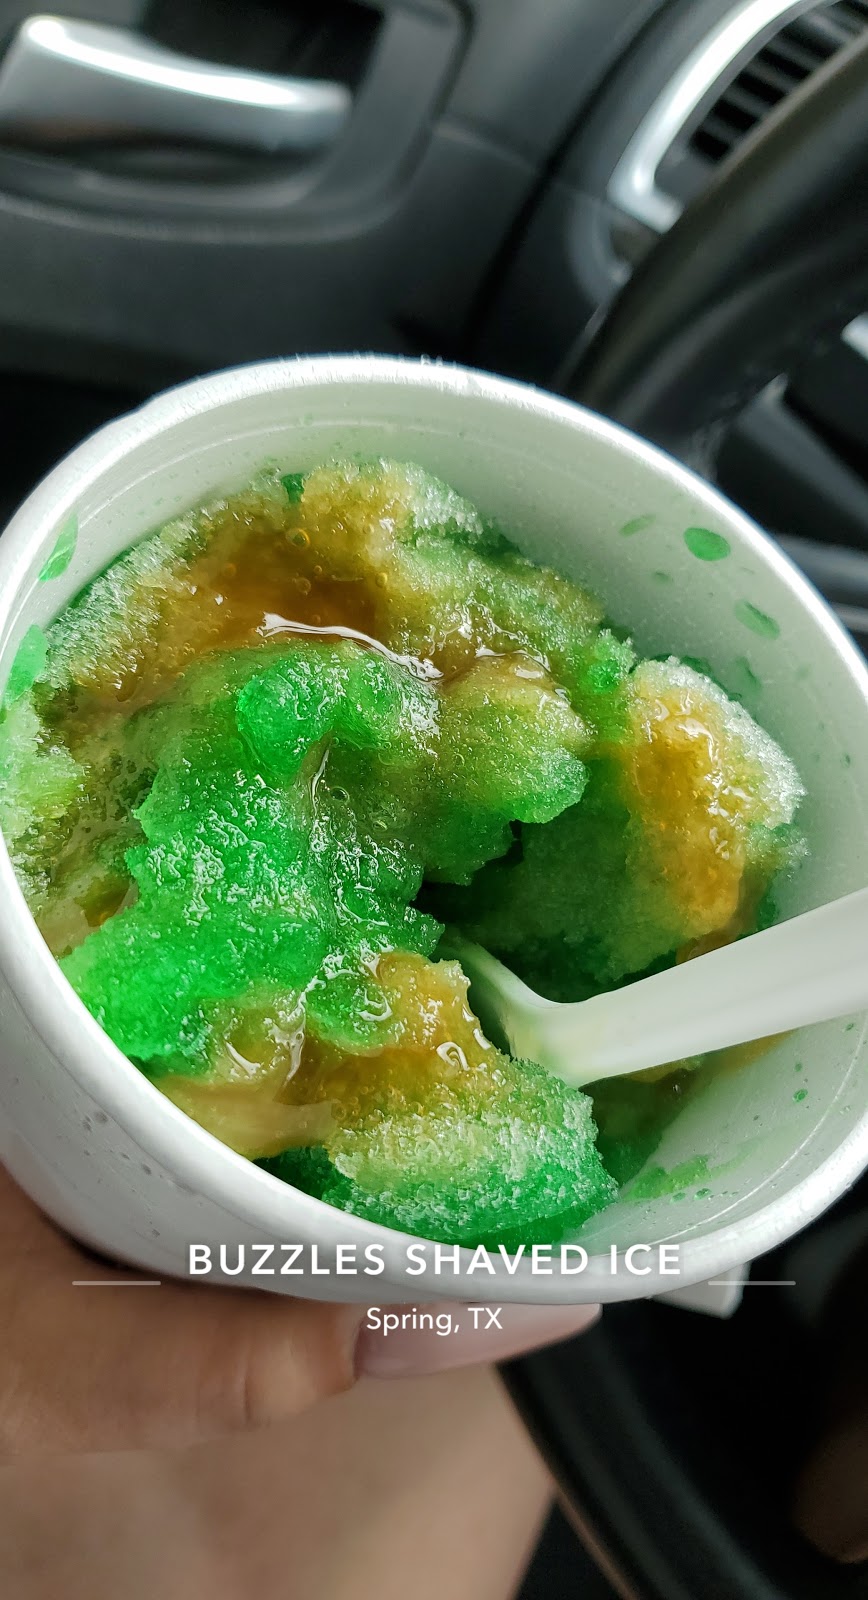 Buzzles Shaved Ice | 2616 Farm to Market 2920 A, Spring, TX 77388 | Phone: (832) 276-4603